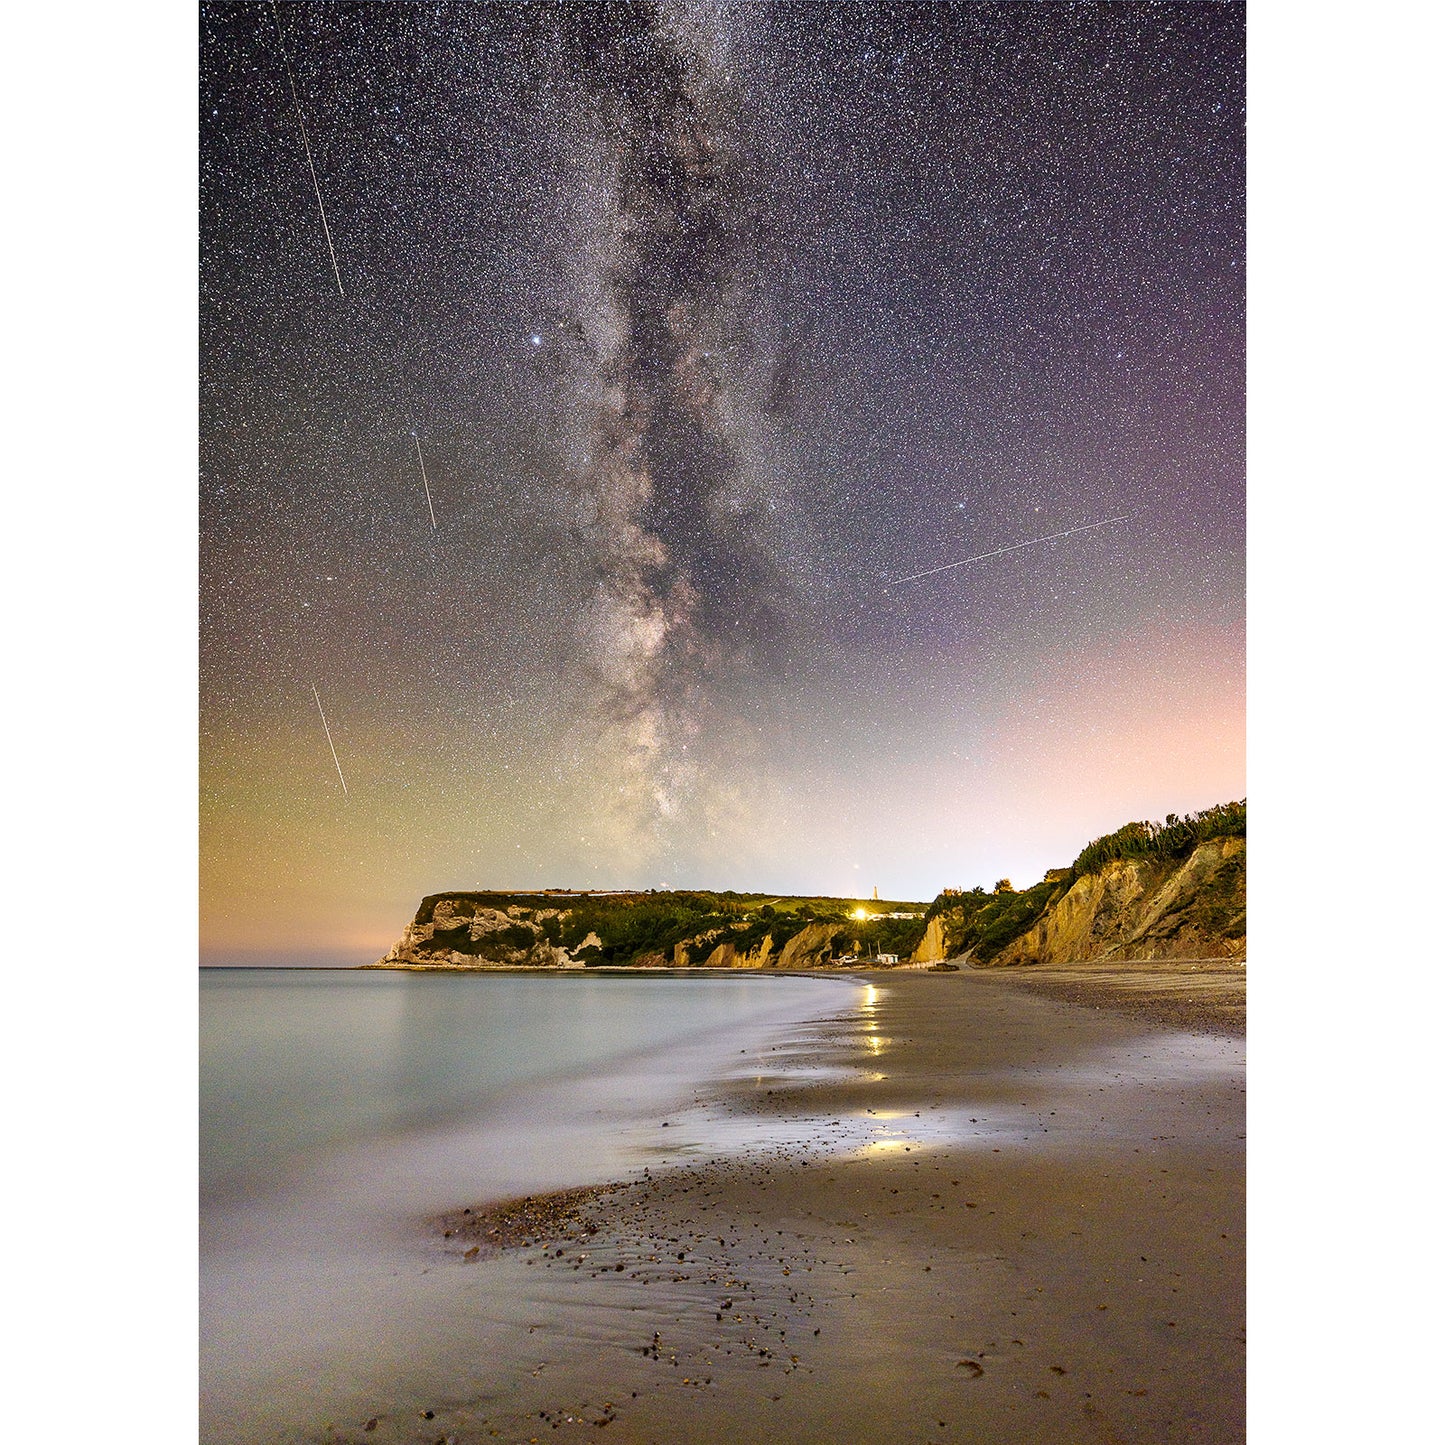 A starry night sky featuring the Milky Way and Perseid Meteors over a tranquil beach on Whitecliff Bay with light reflections on the water's surface by Available Light Photography.